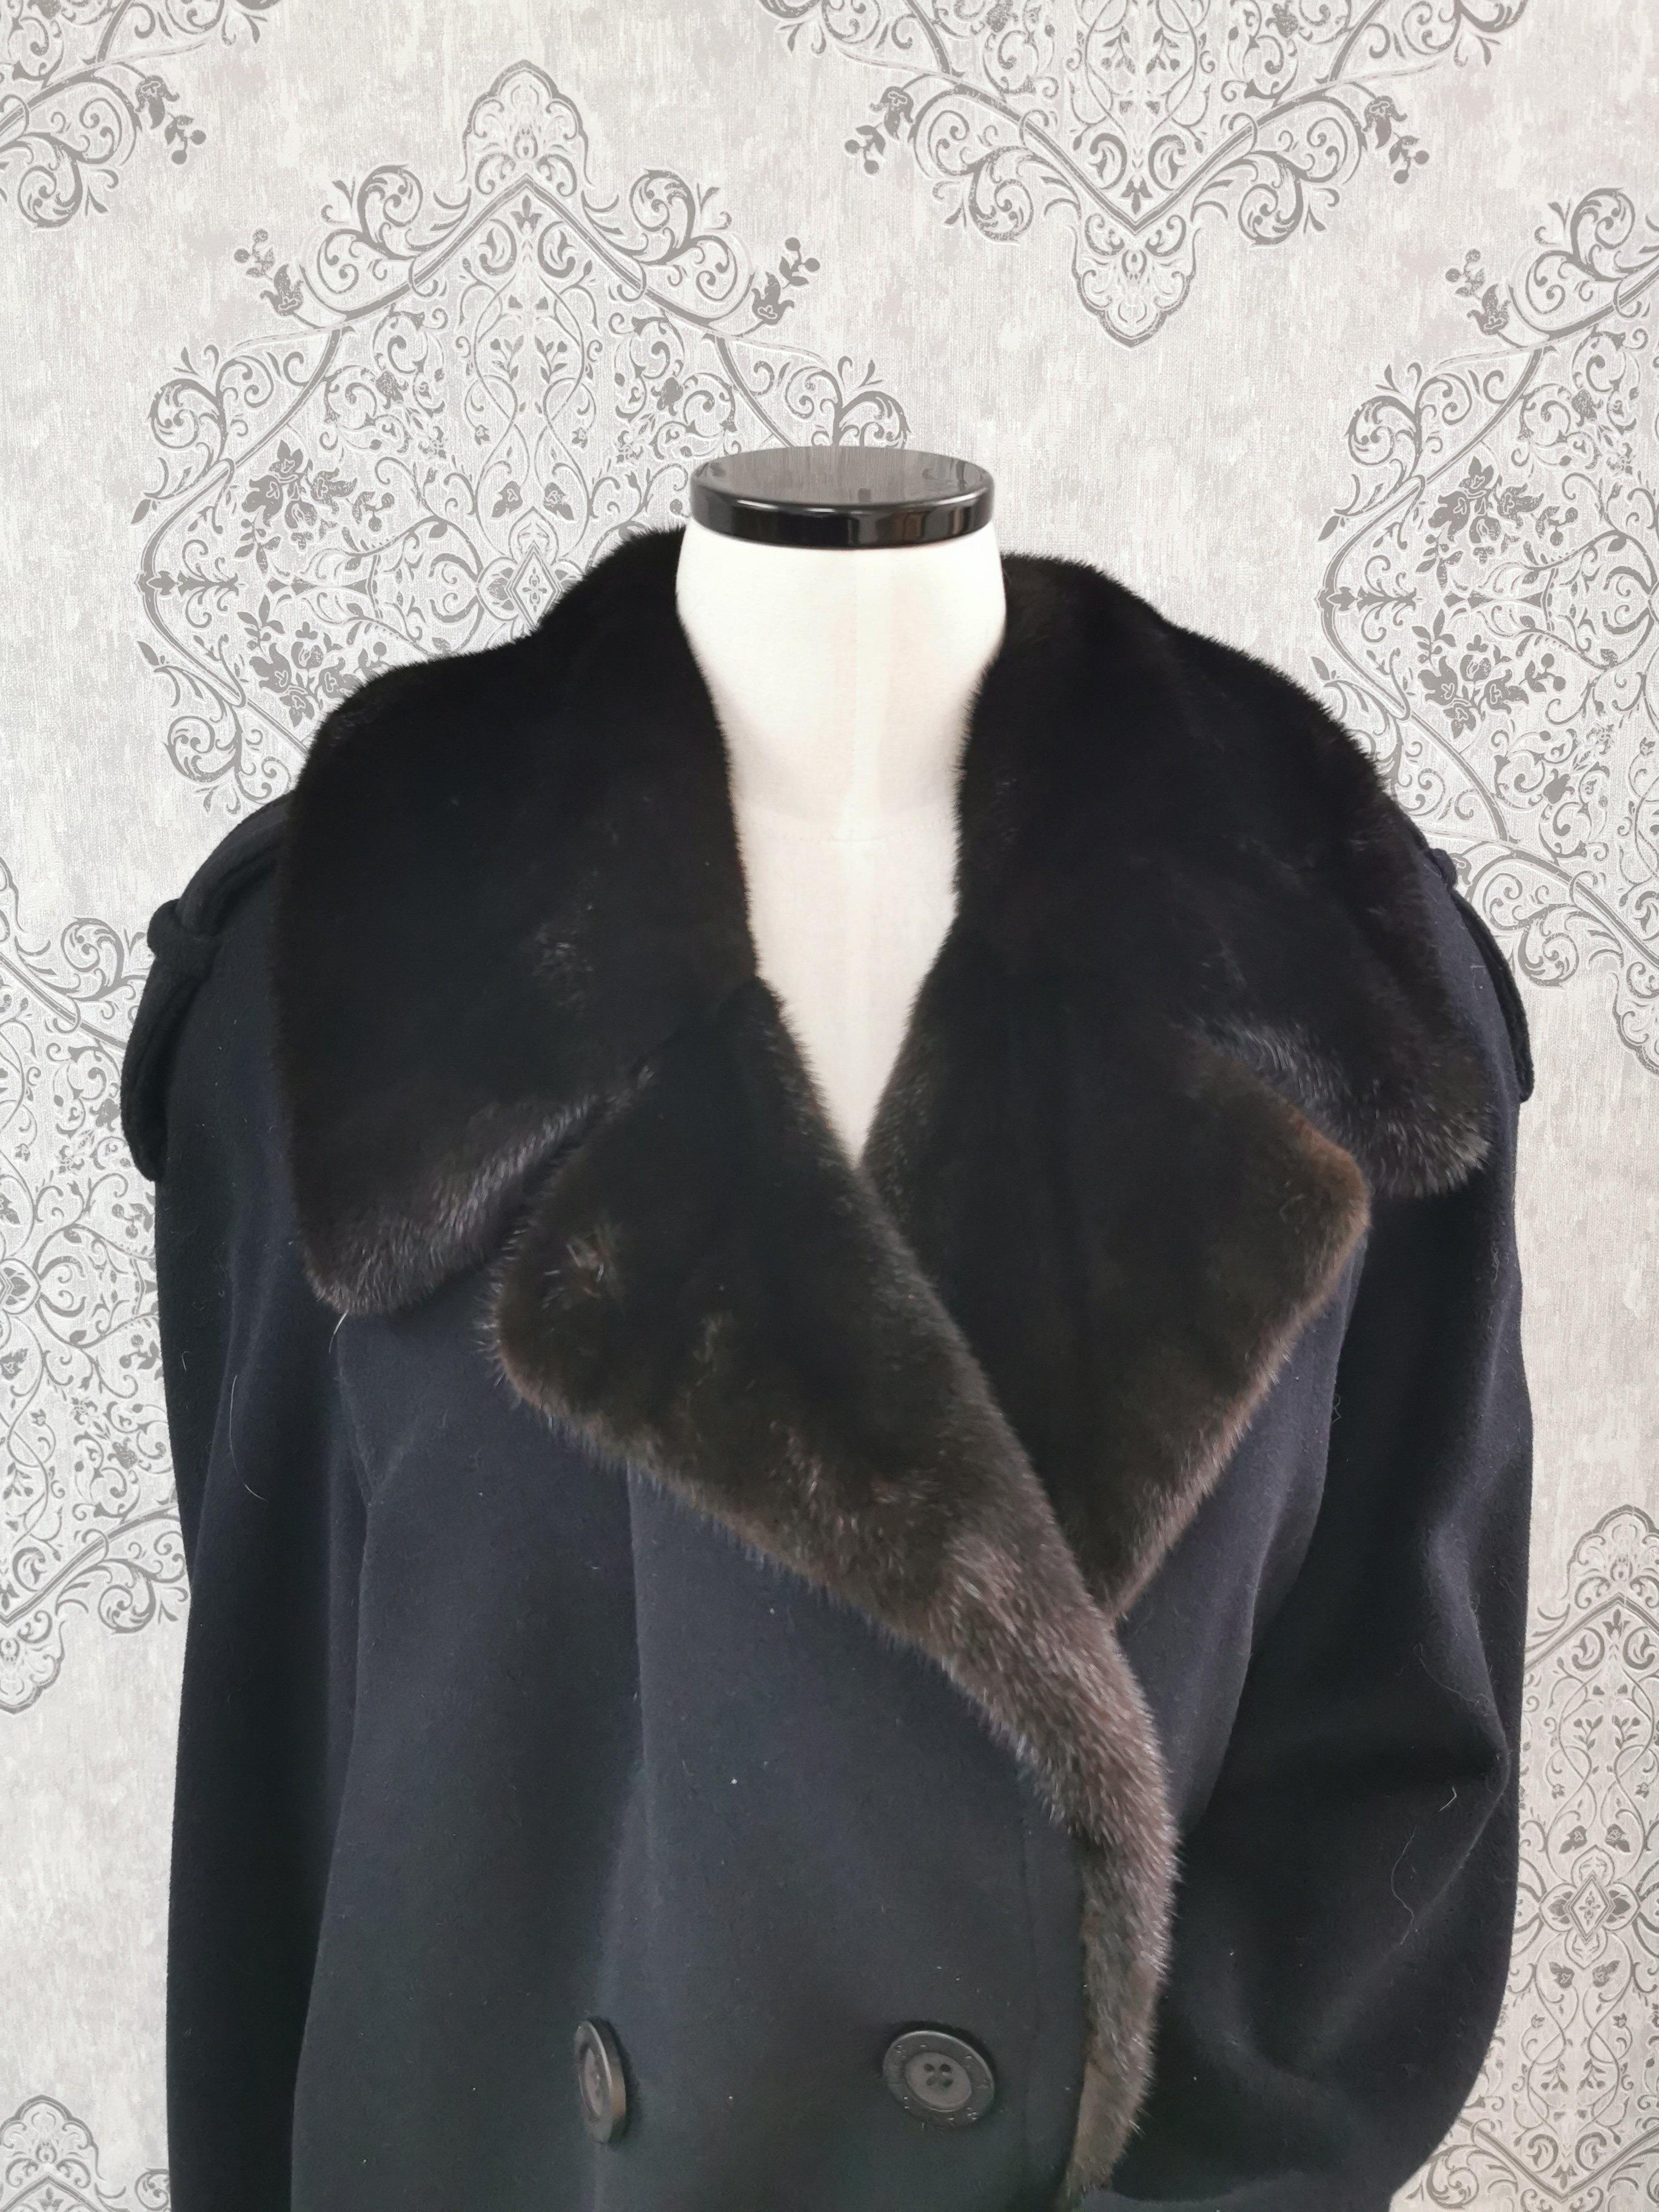 Black Brand New Bisang Couture Overcoat with Mink Fur trim (Size 10 - Medium)